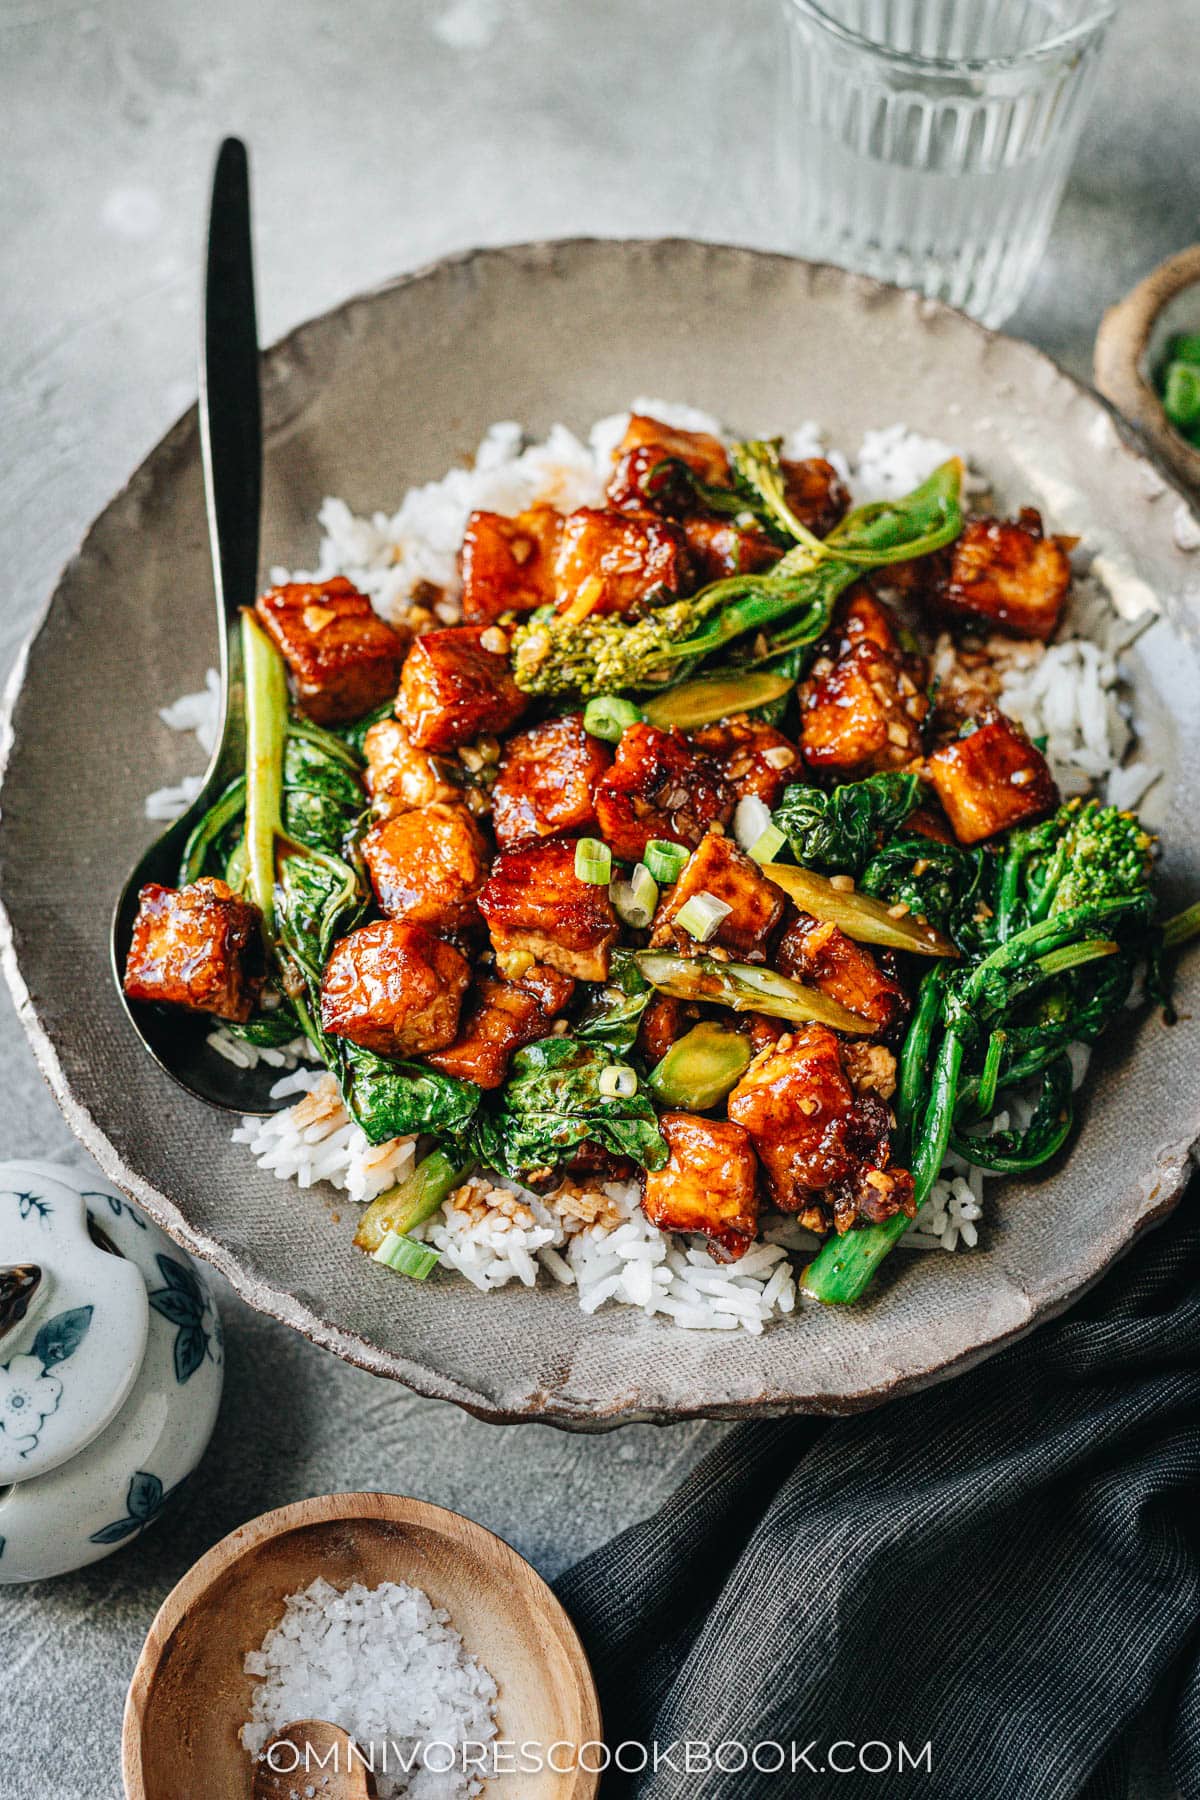 Crispy Tofu with Broccoli Rabe in a sticky sauce over rice